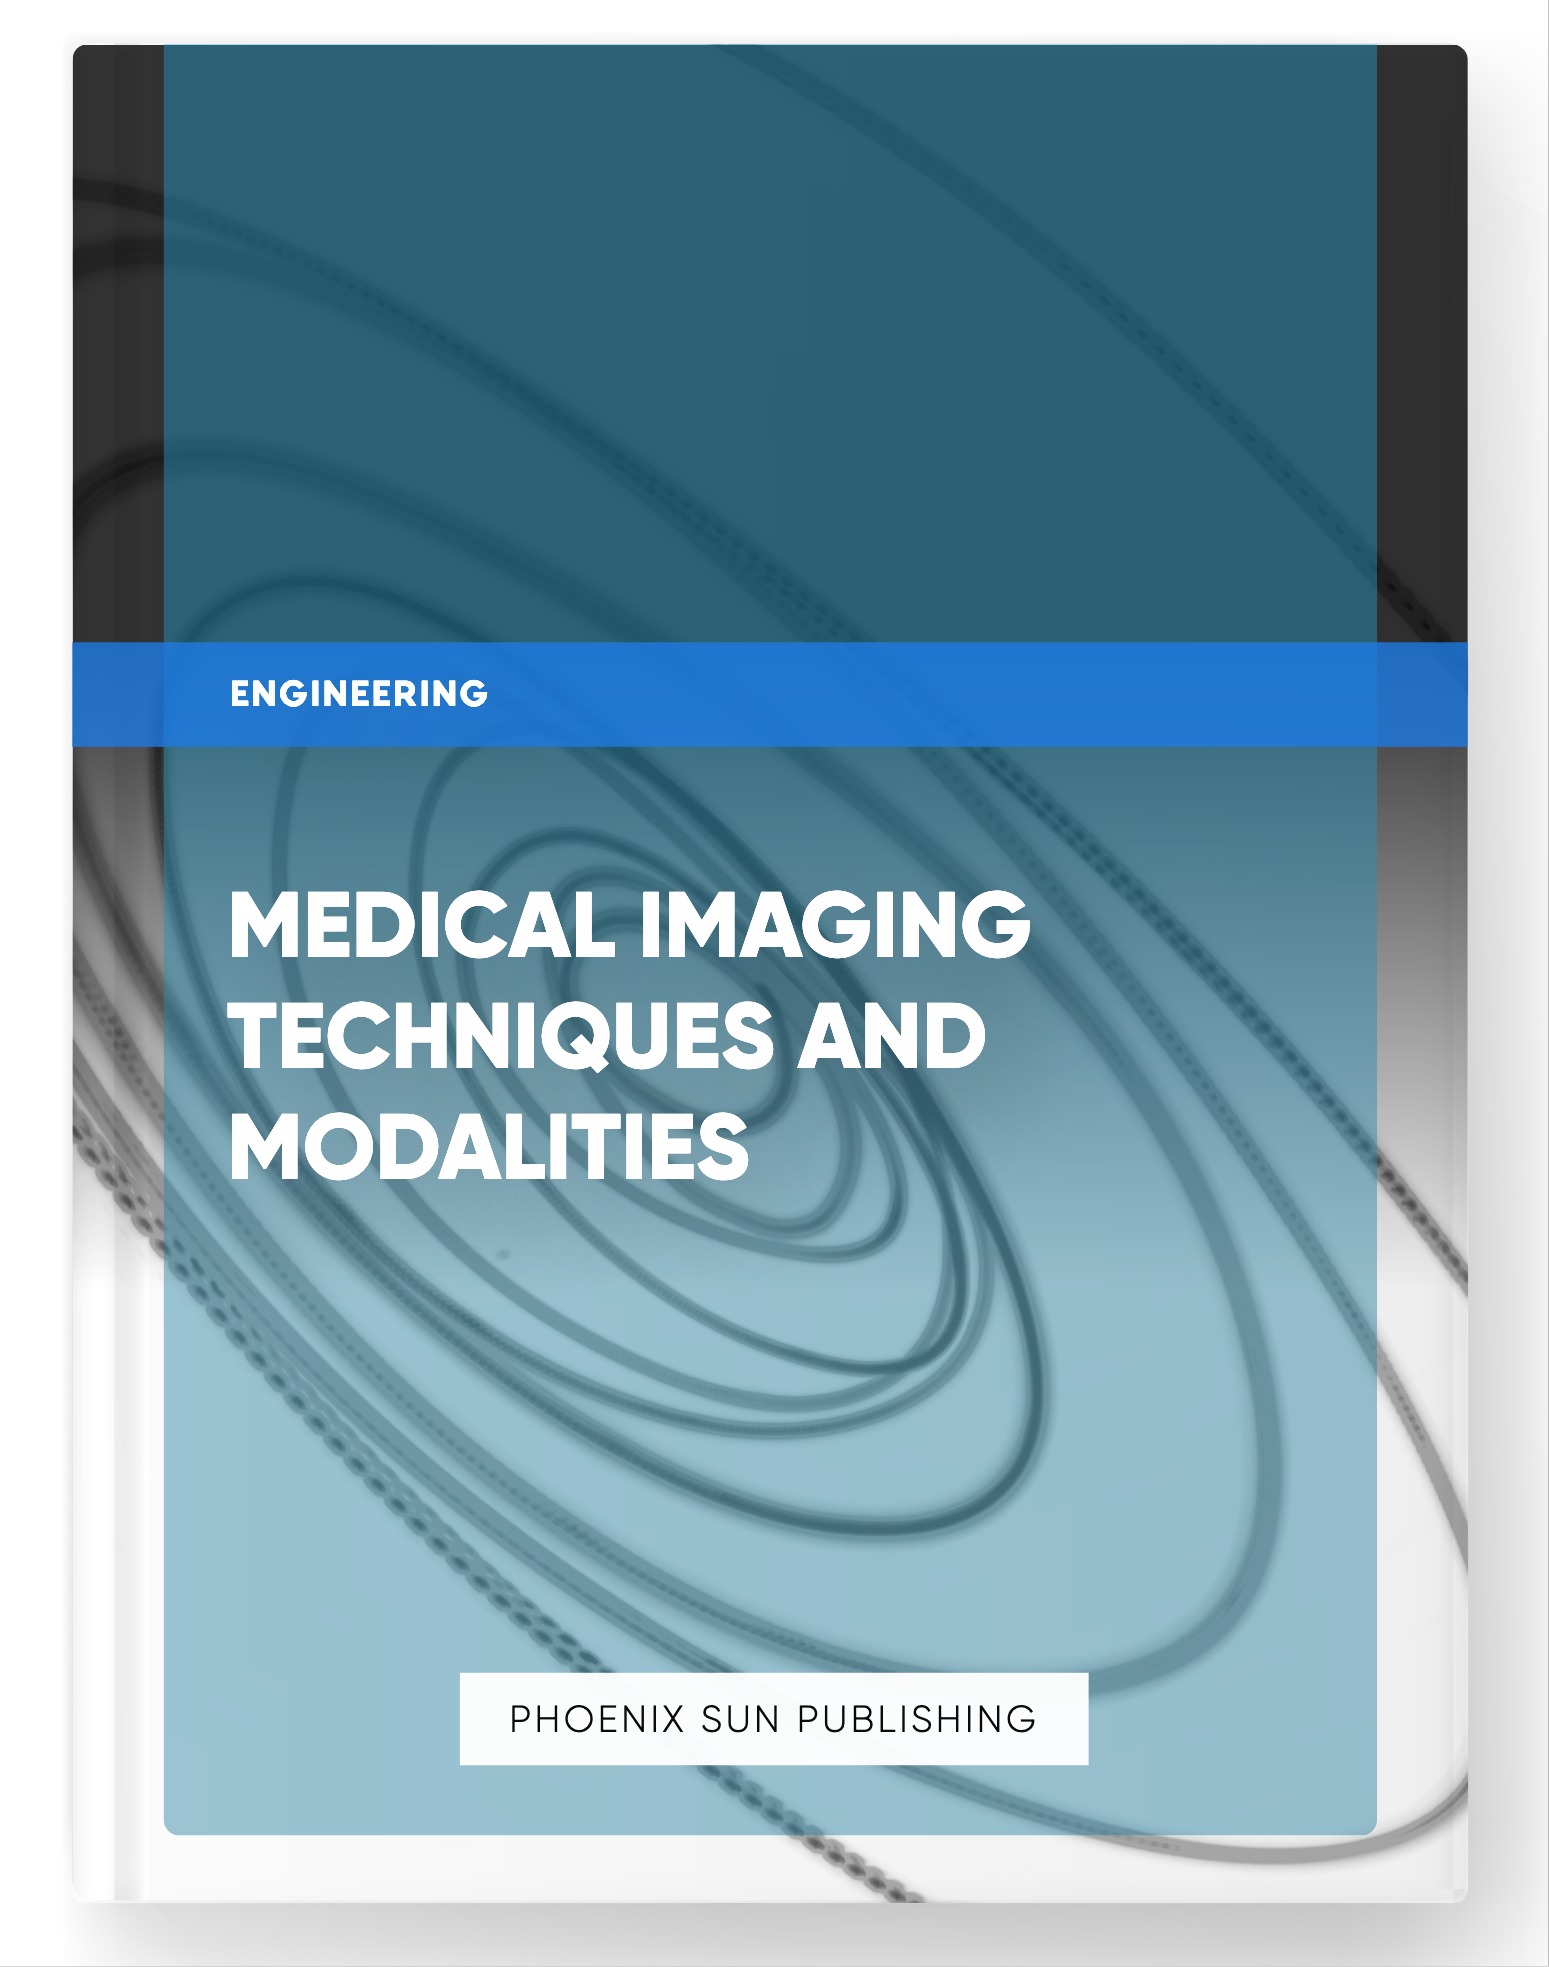 Medical Imaging Techniques and Modalities